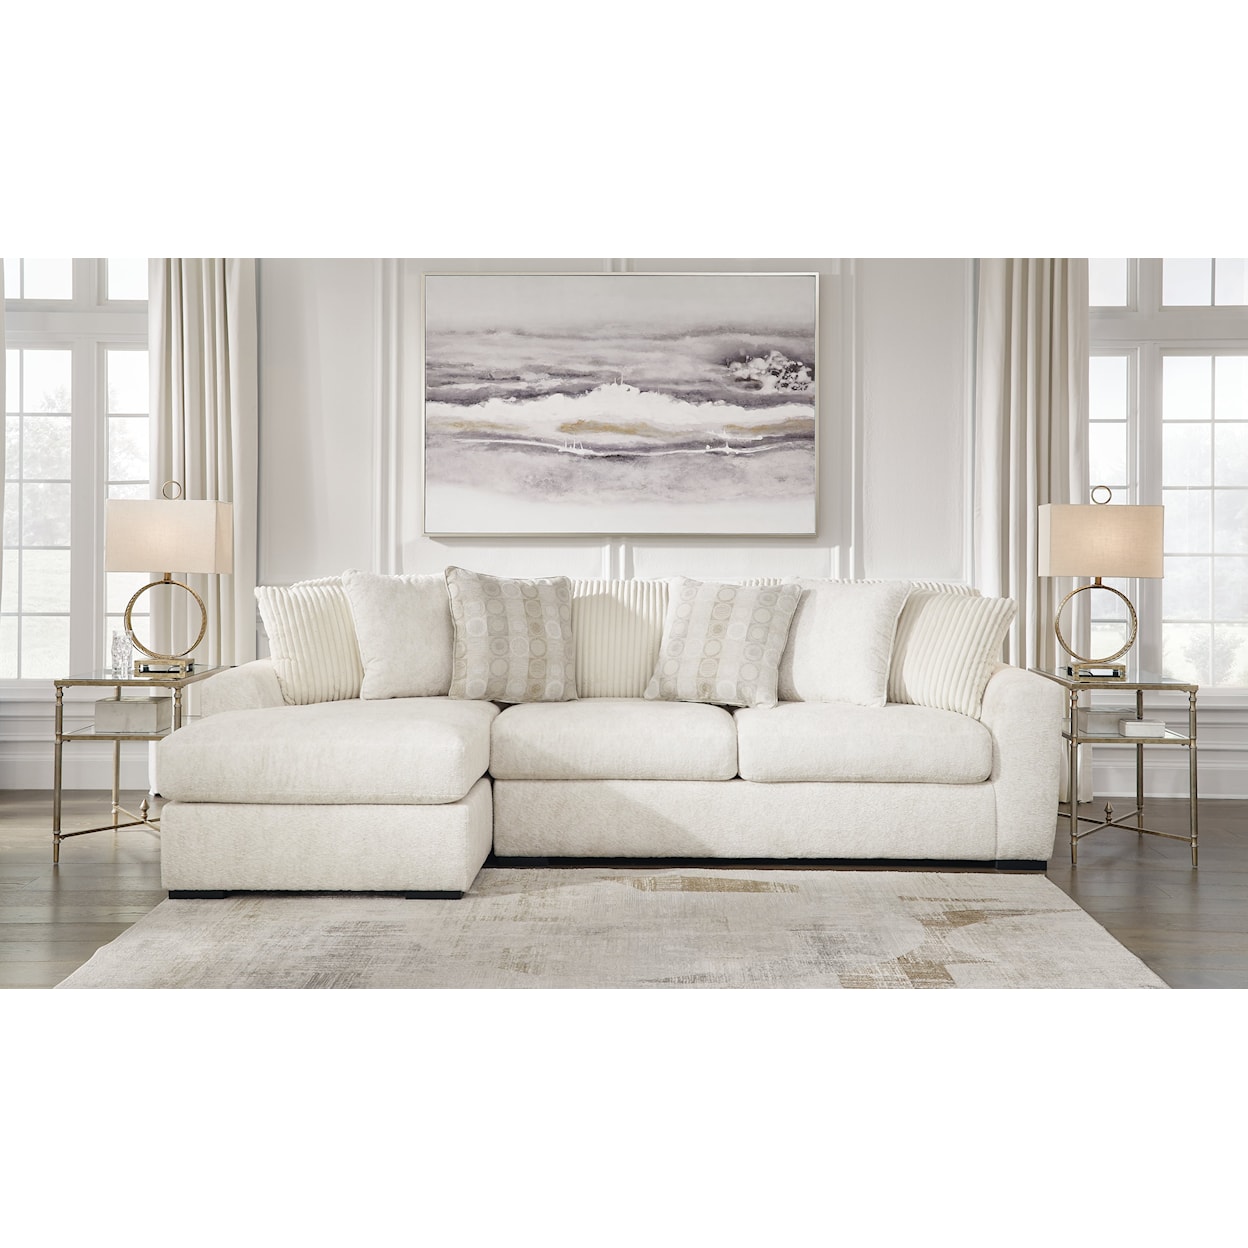 Signature Design by Ashley Furniture Chessington 2-Piece Sectional With Chaise